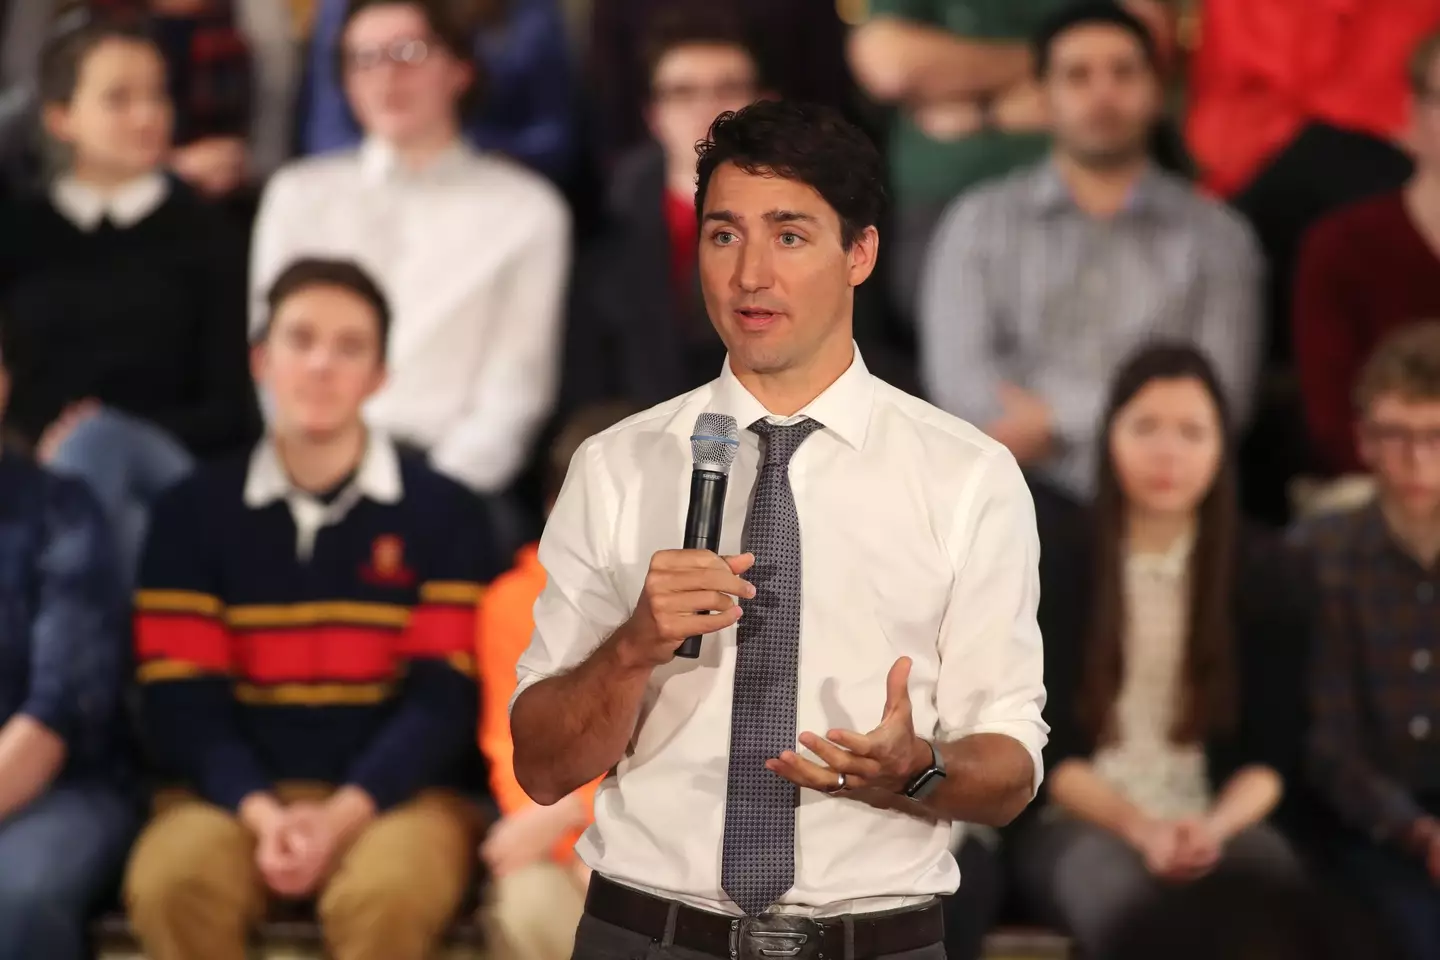 Justin Trudeau has stressed Canada's ongoing support for Ukraine.